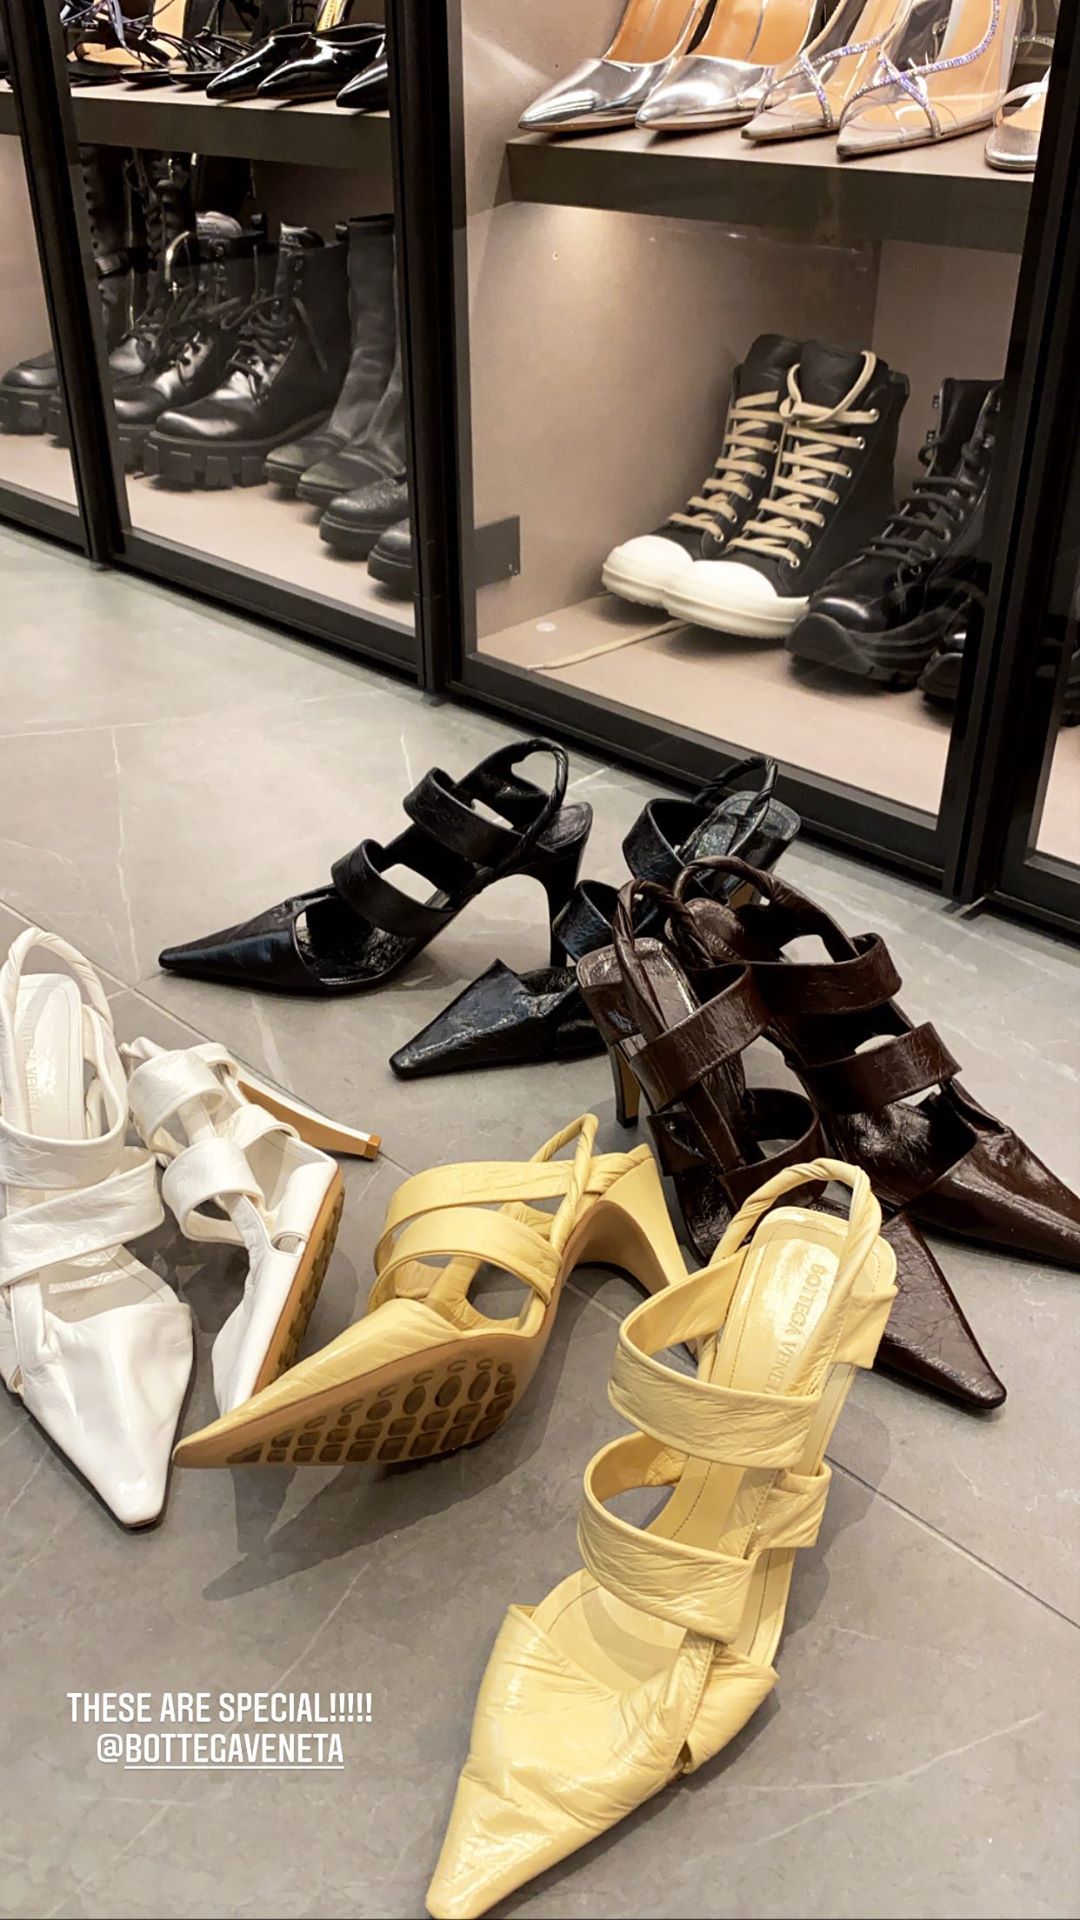 Kylie Jenner Took Us on a Tour of Her Organized, Huge Shoe Closet